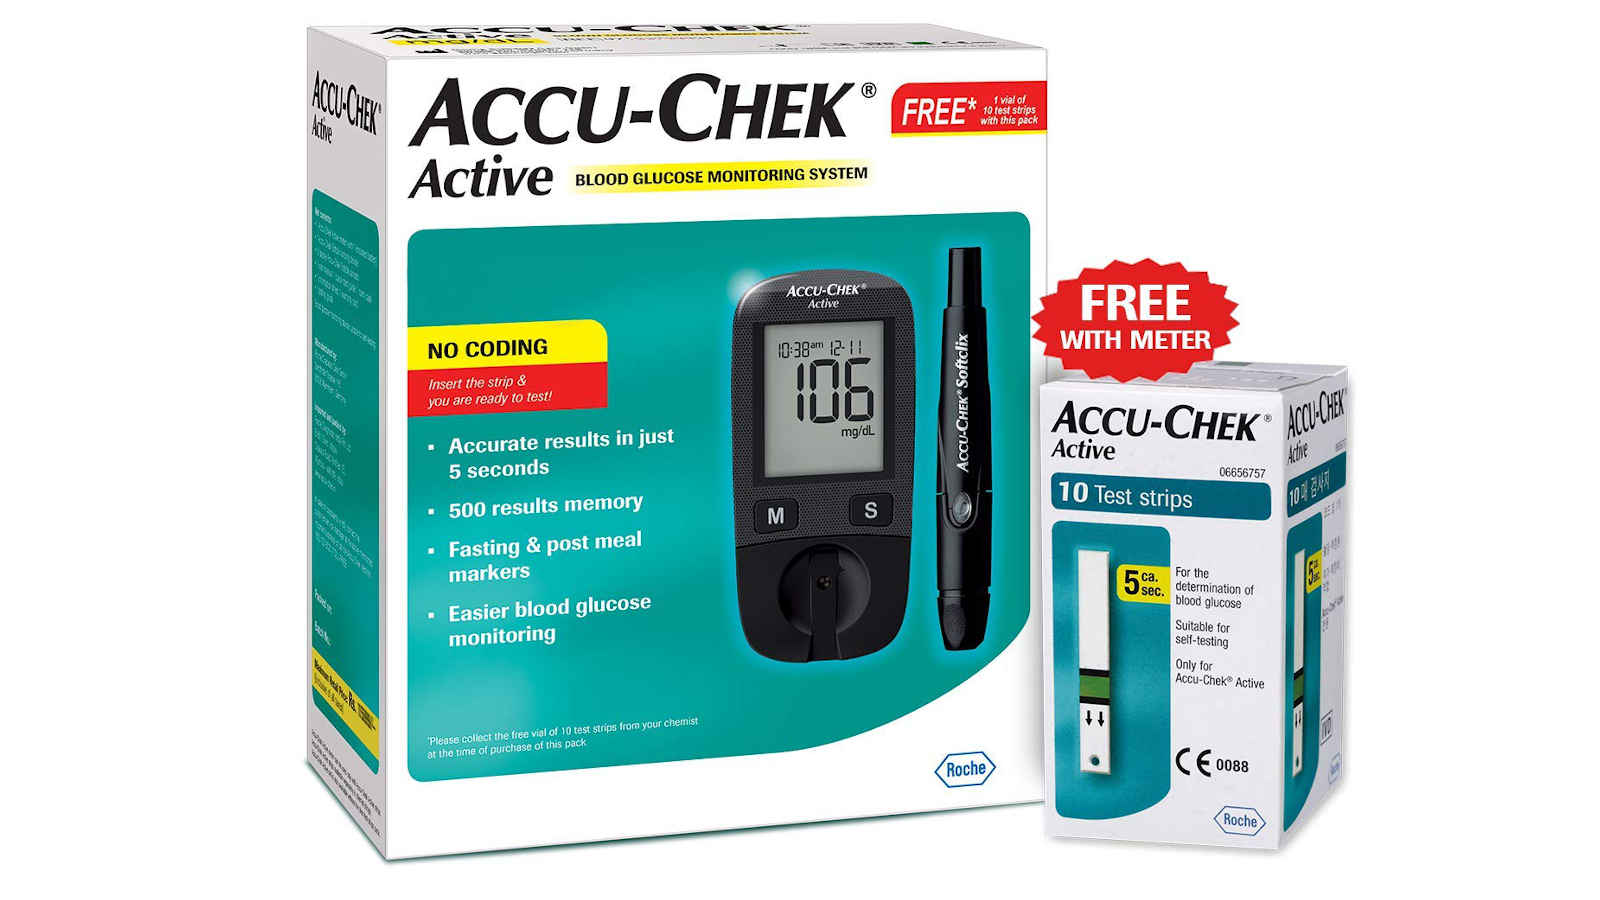 Emallcart AccuChek Active Blood Glucose Meter Kit Vial of 10 strips free Multicolor